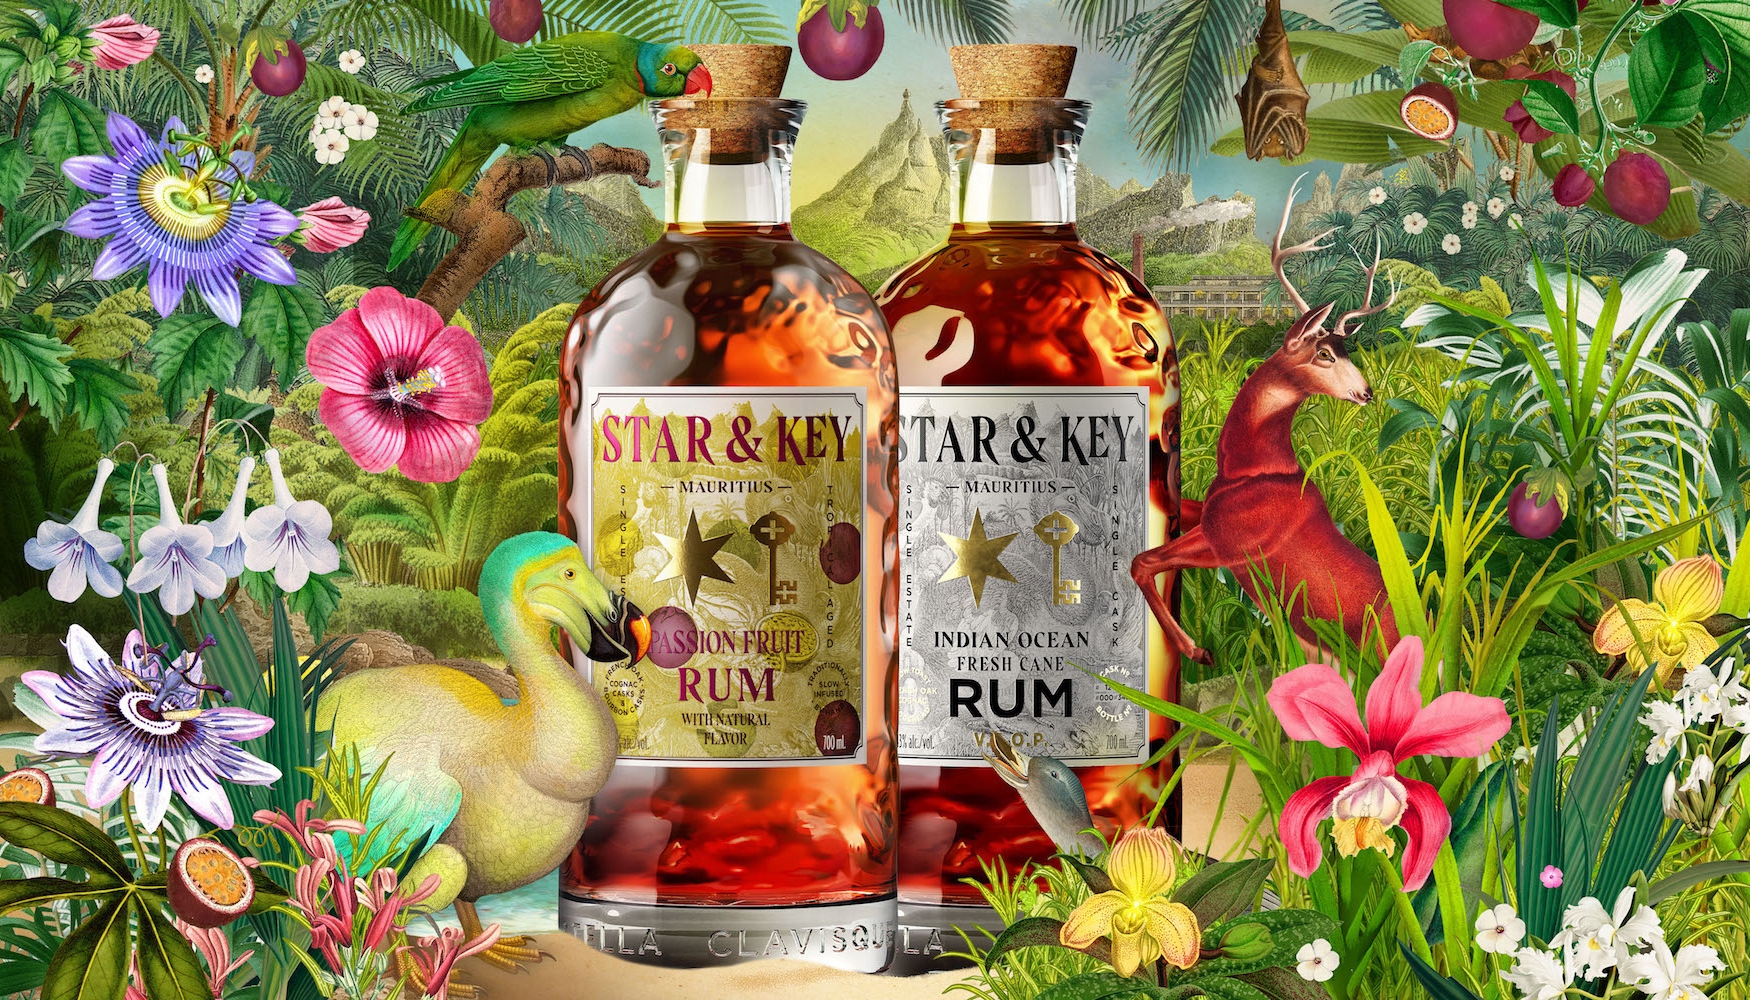 Promotional image of Star and Key Rum bottles